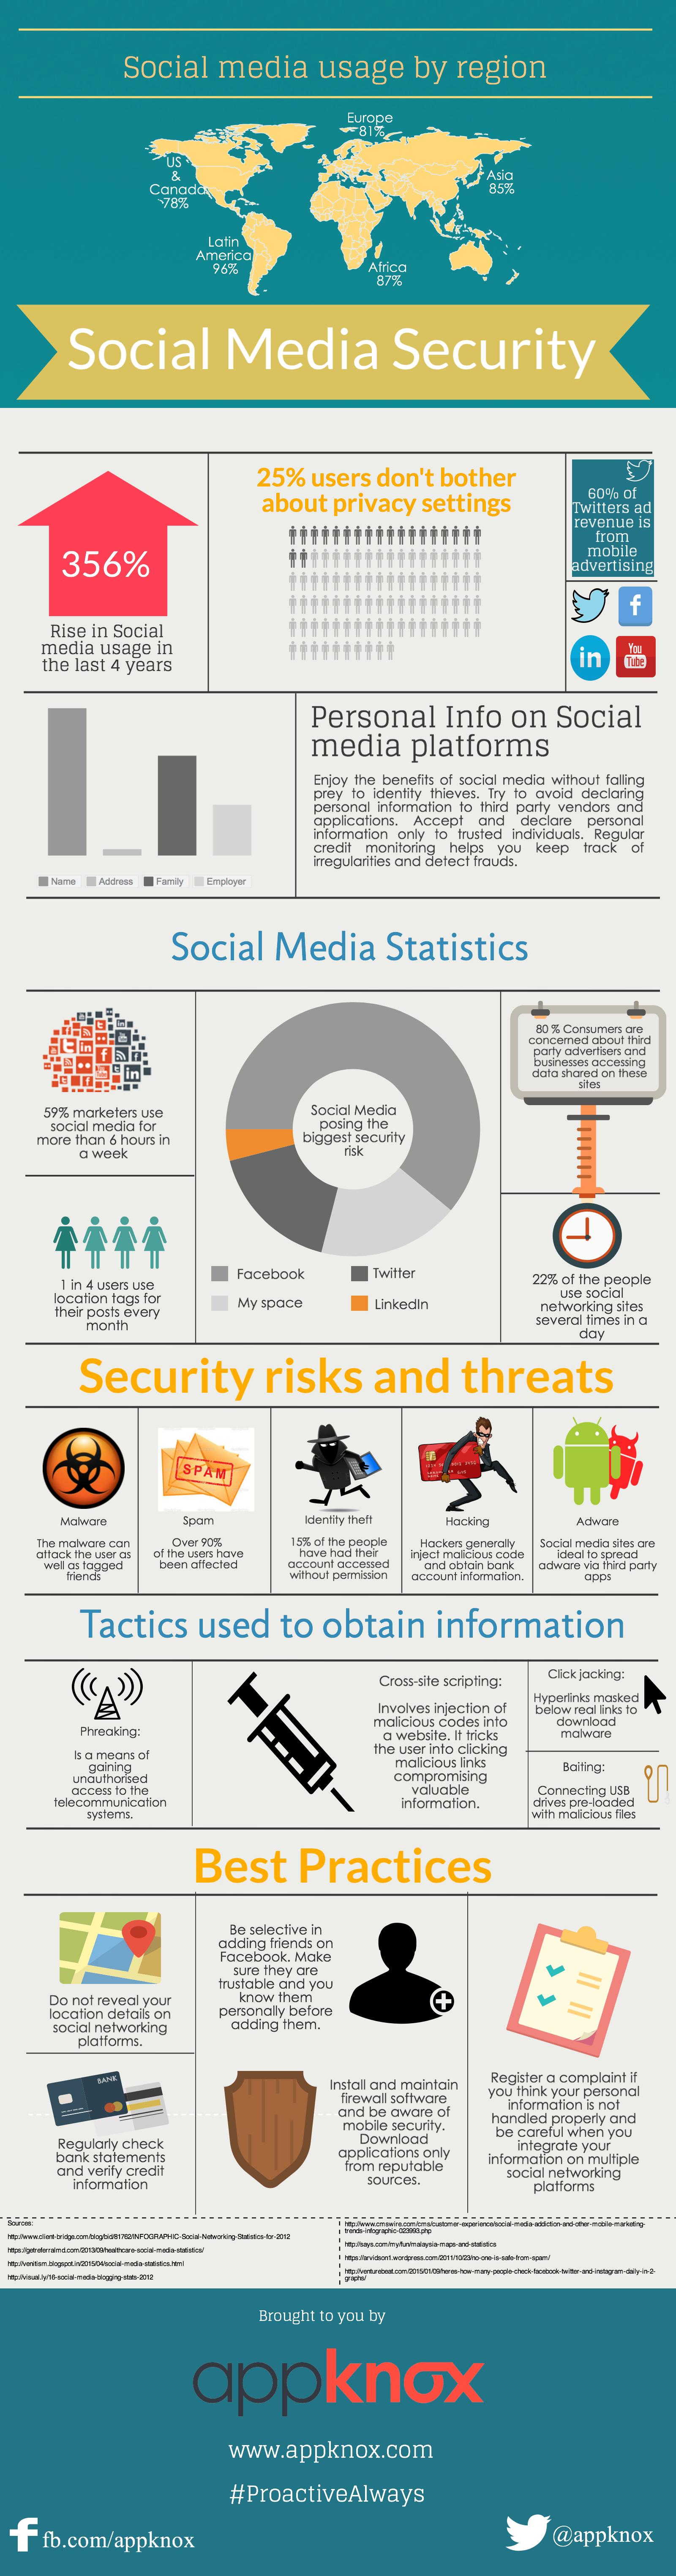 [Infographic] Social Media Security